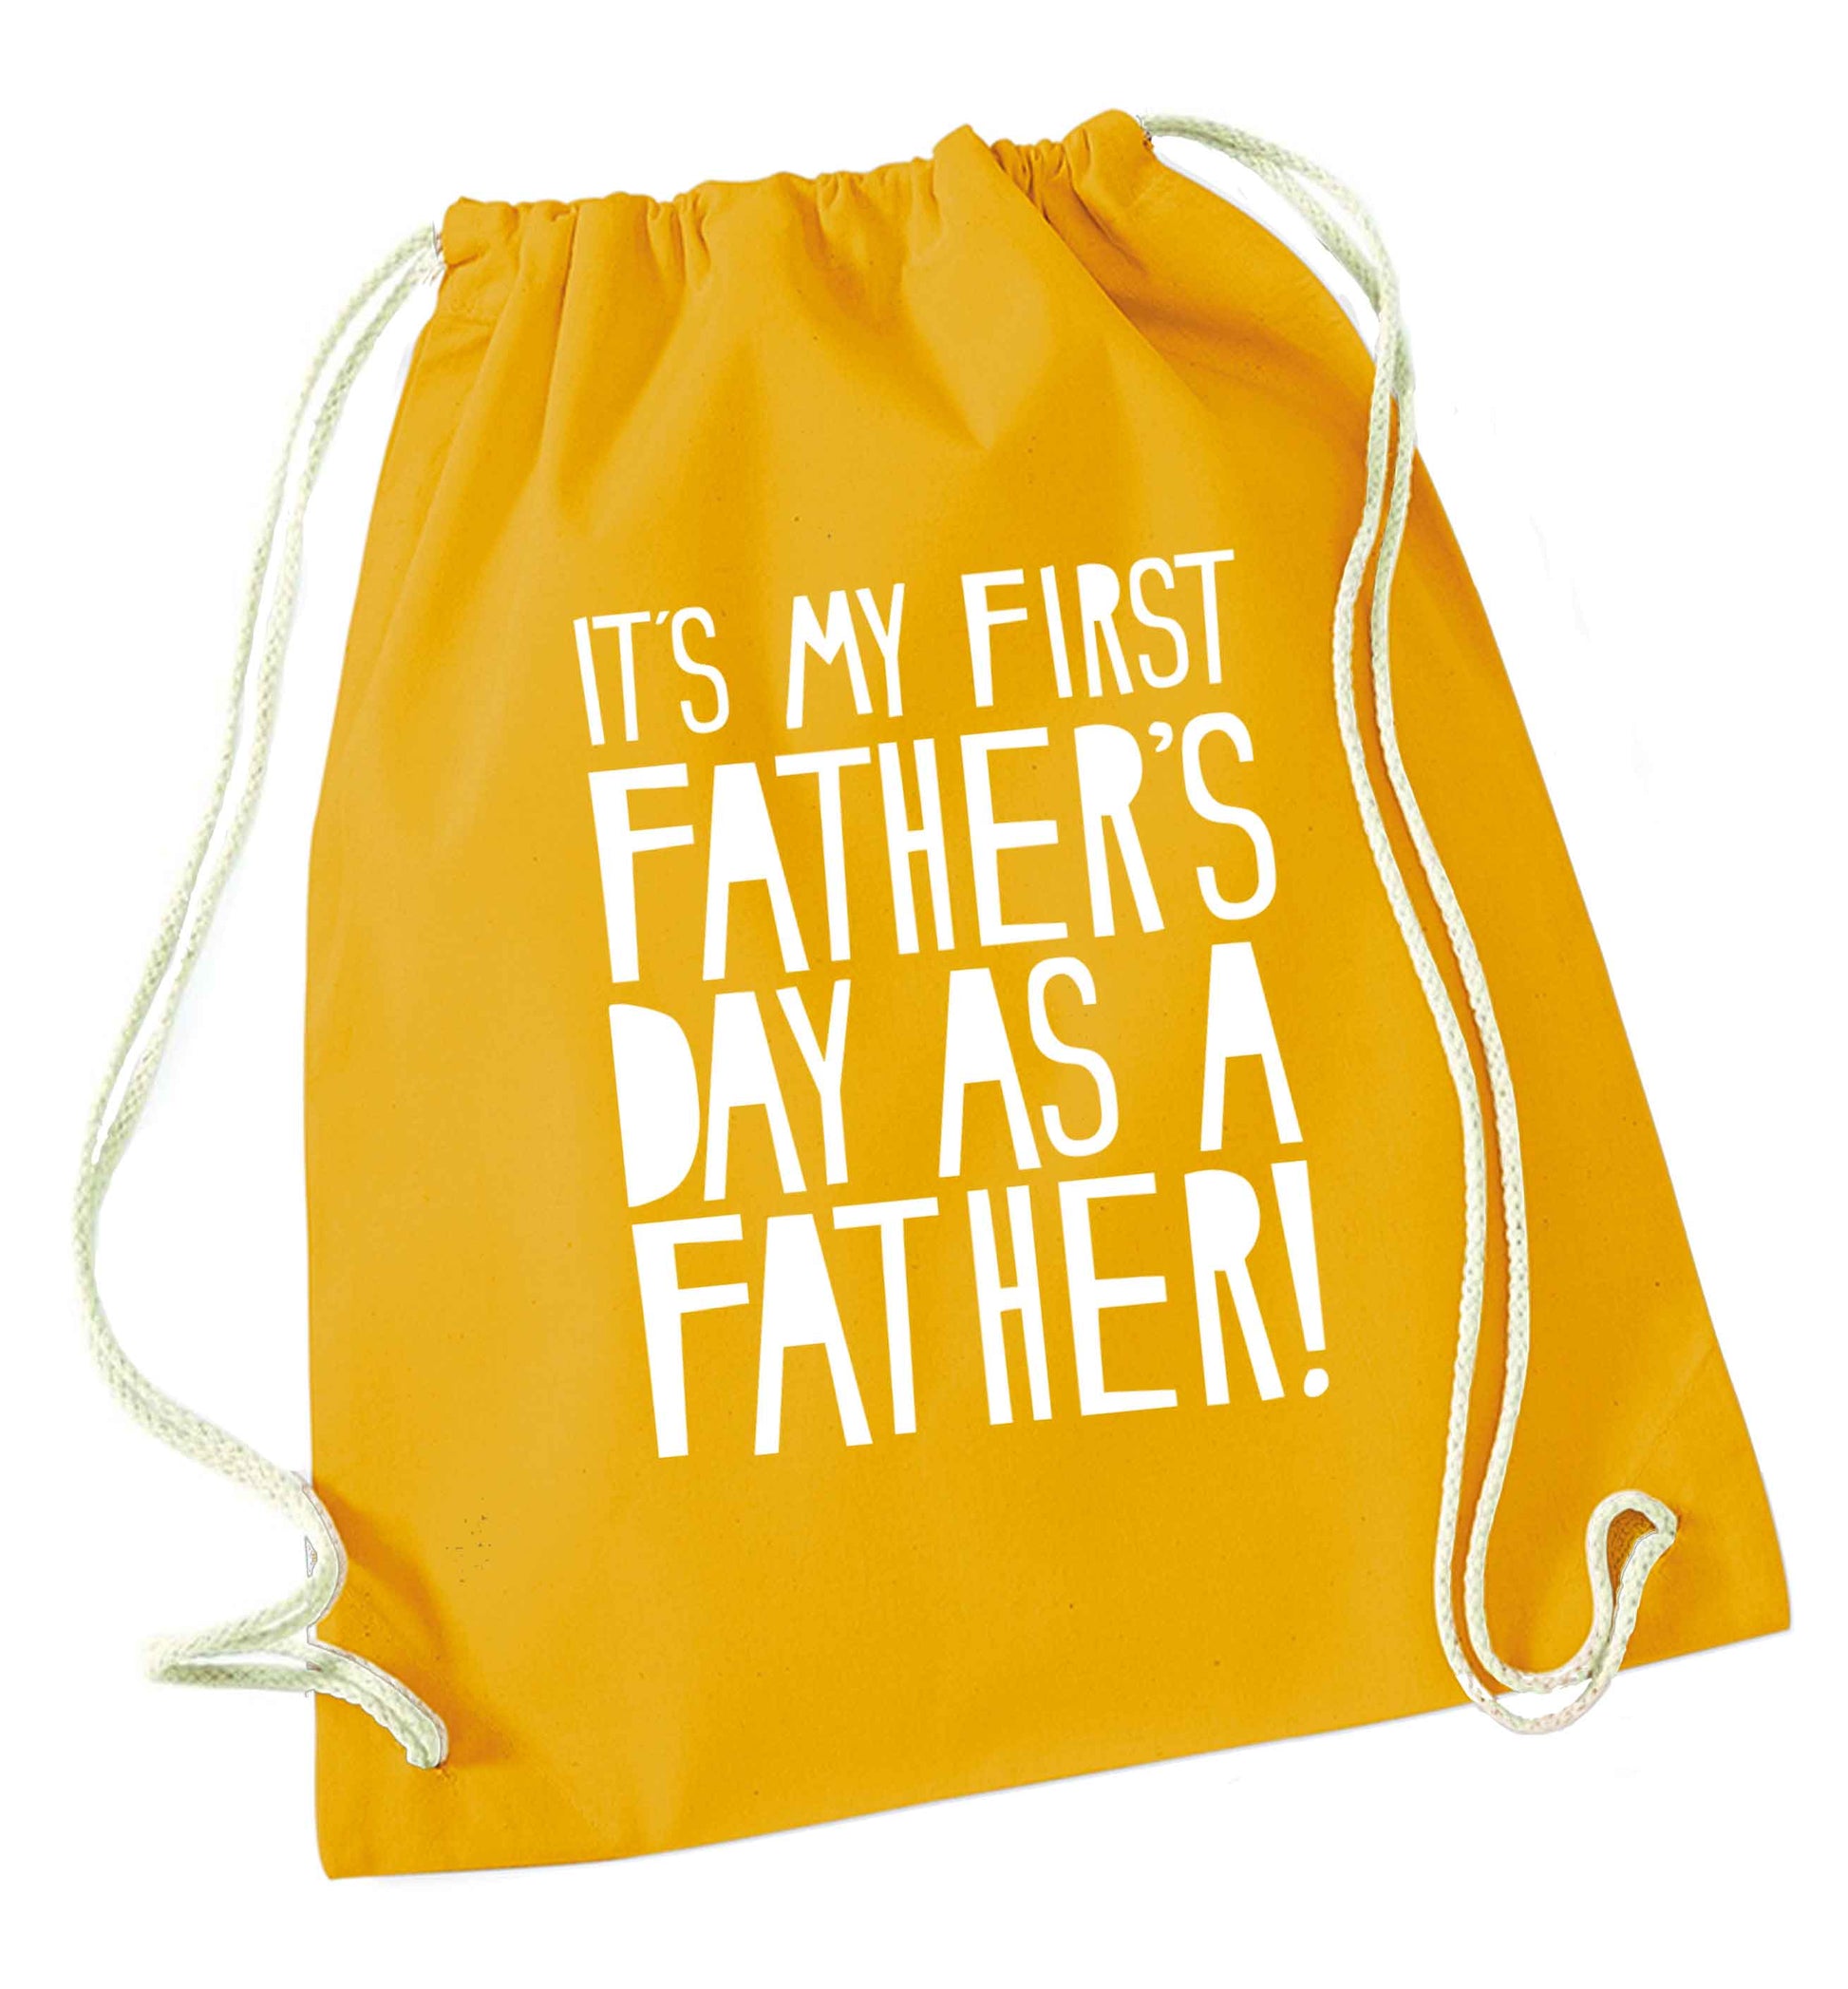 It's my first father's day as a father! mustard drawstring bag